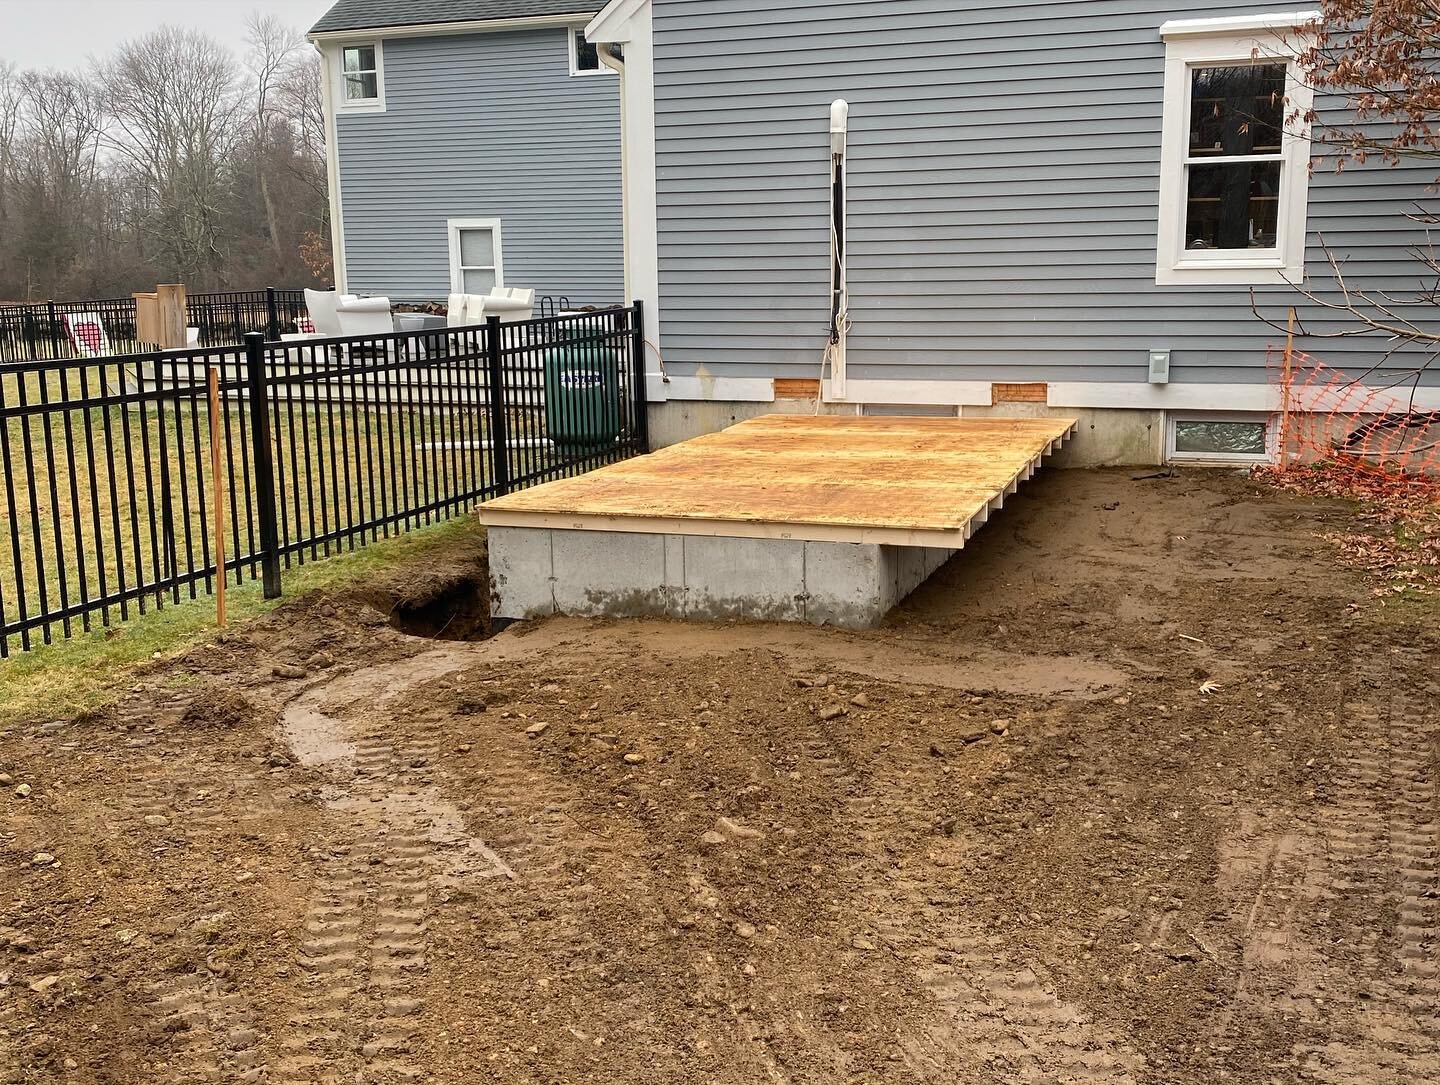 Small addition for a secondary basement access for a client in Boxborough, MA. 
Give Groundworks a call today for all your excavation and foundation needs!

#contractors #contractorsofinstagram #remodeling #constructionwork #constructioncompany #buil